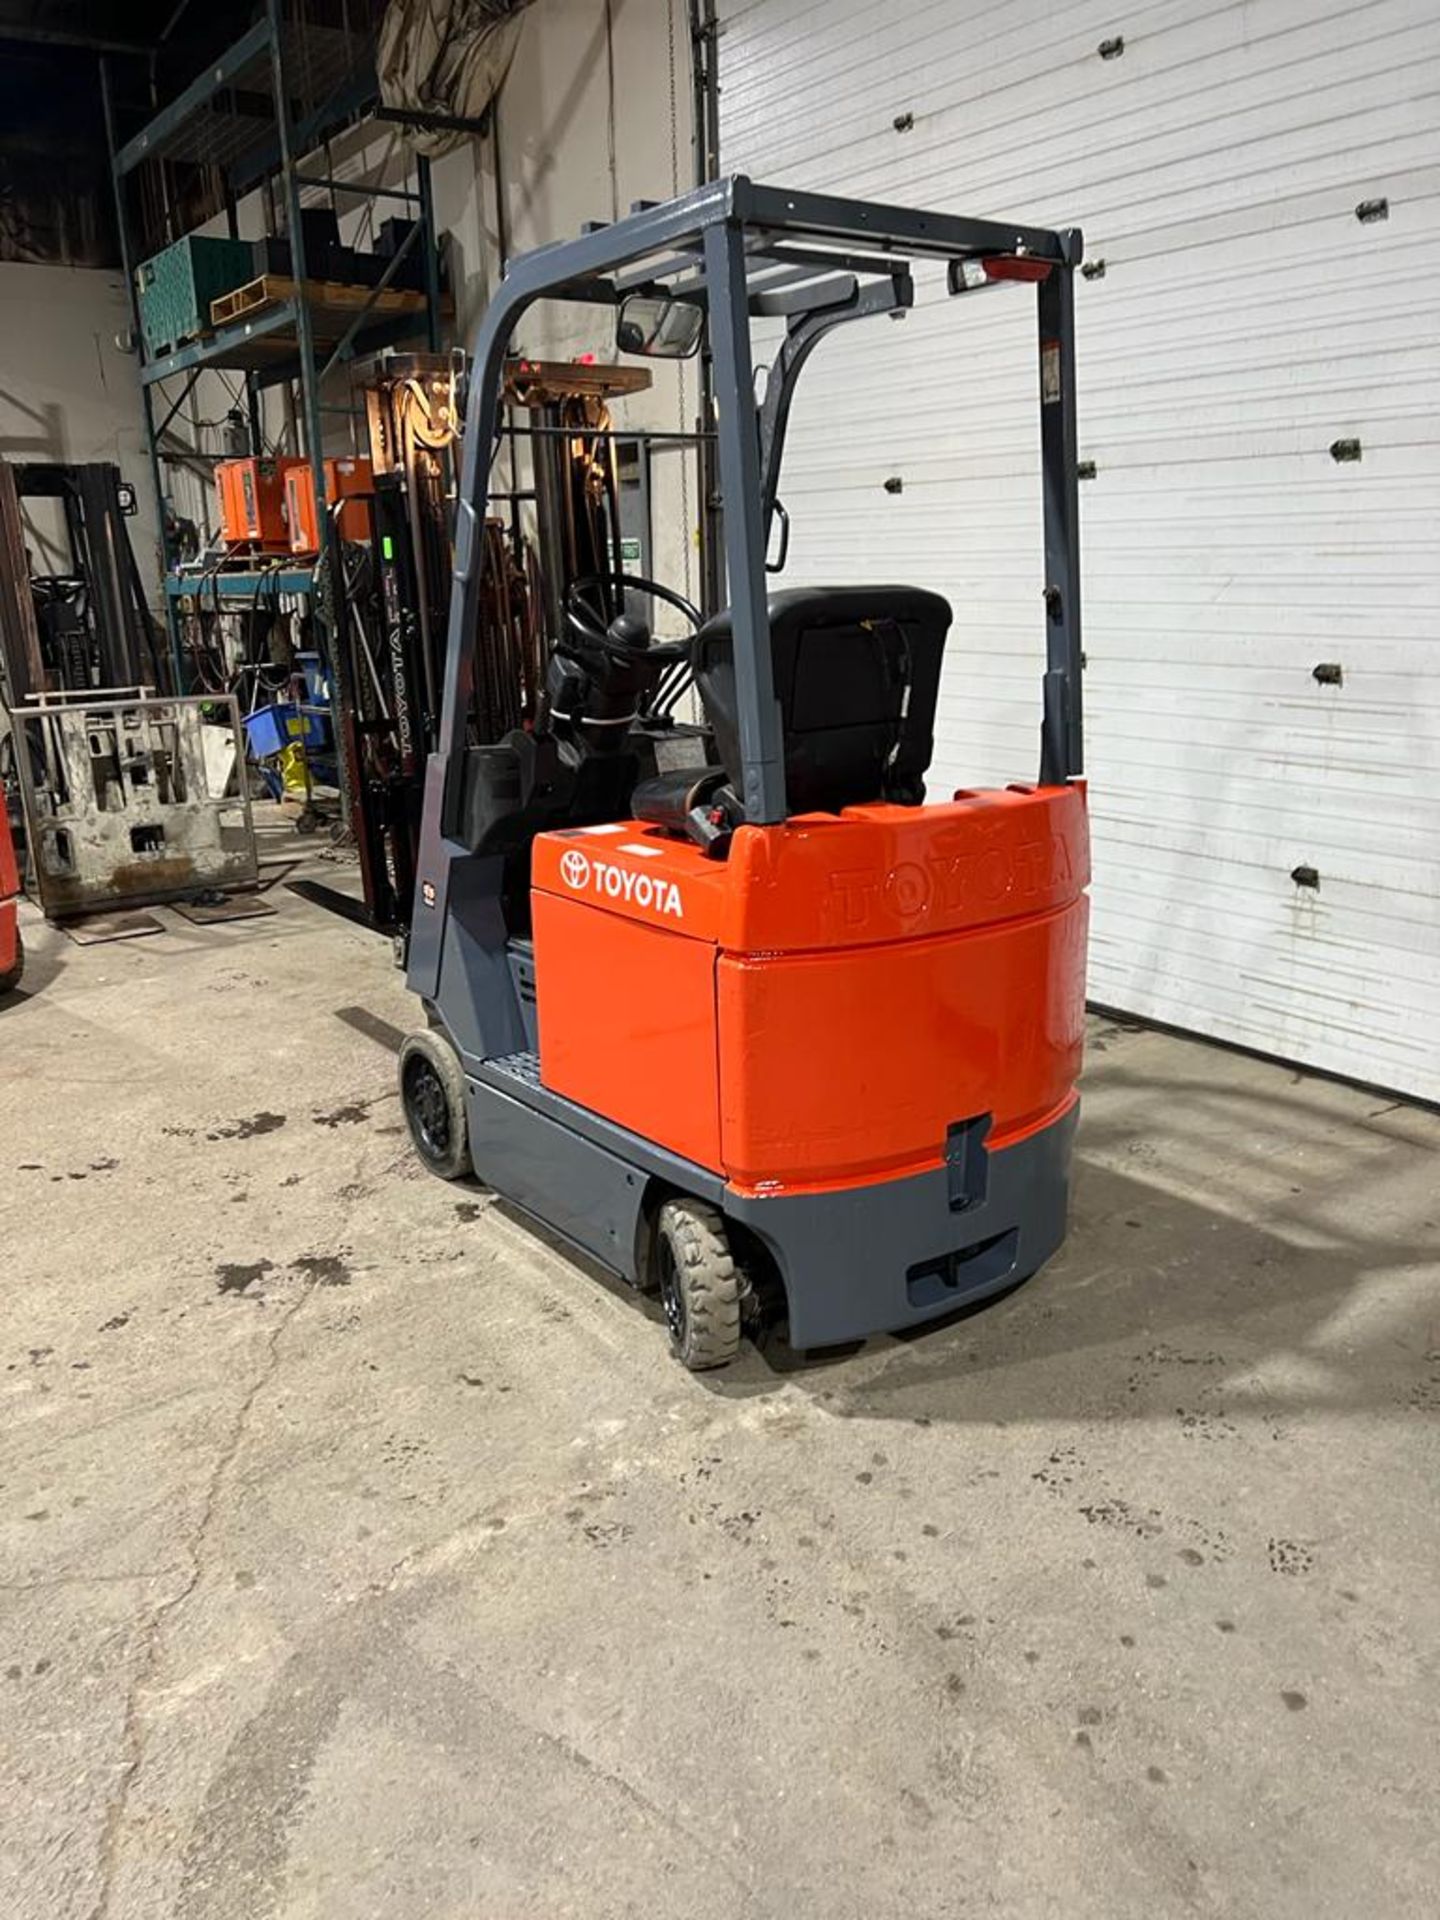 NICE 2016 Toyota 3,000lbs Capacity Forklift NEW 36V Battery with 3-stage mast - FREE CUSTOMS - Image 4 of 4